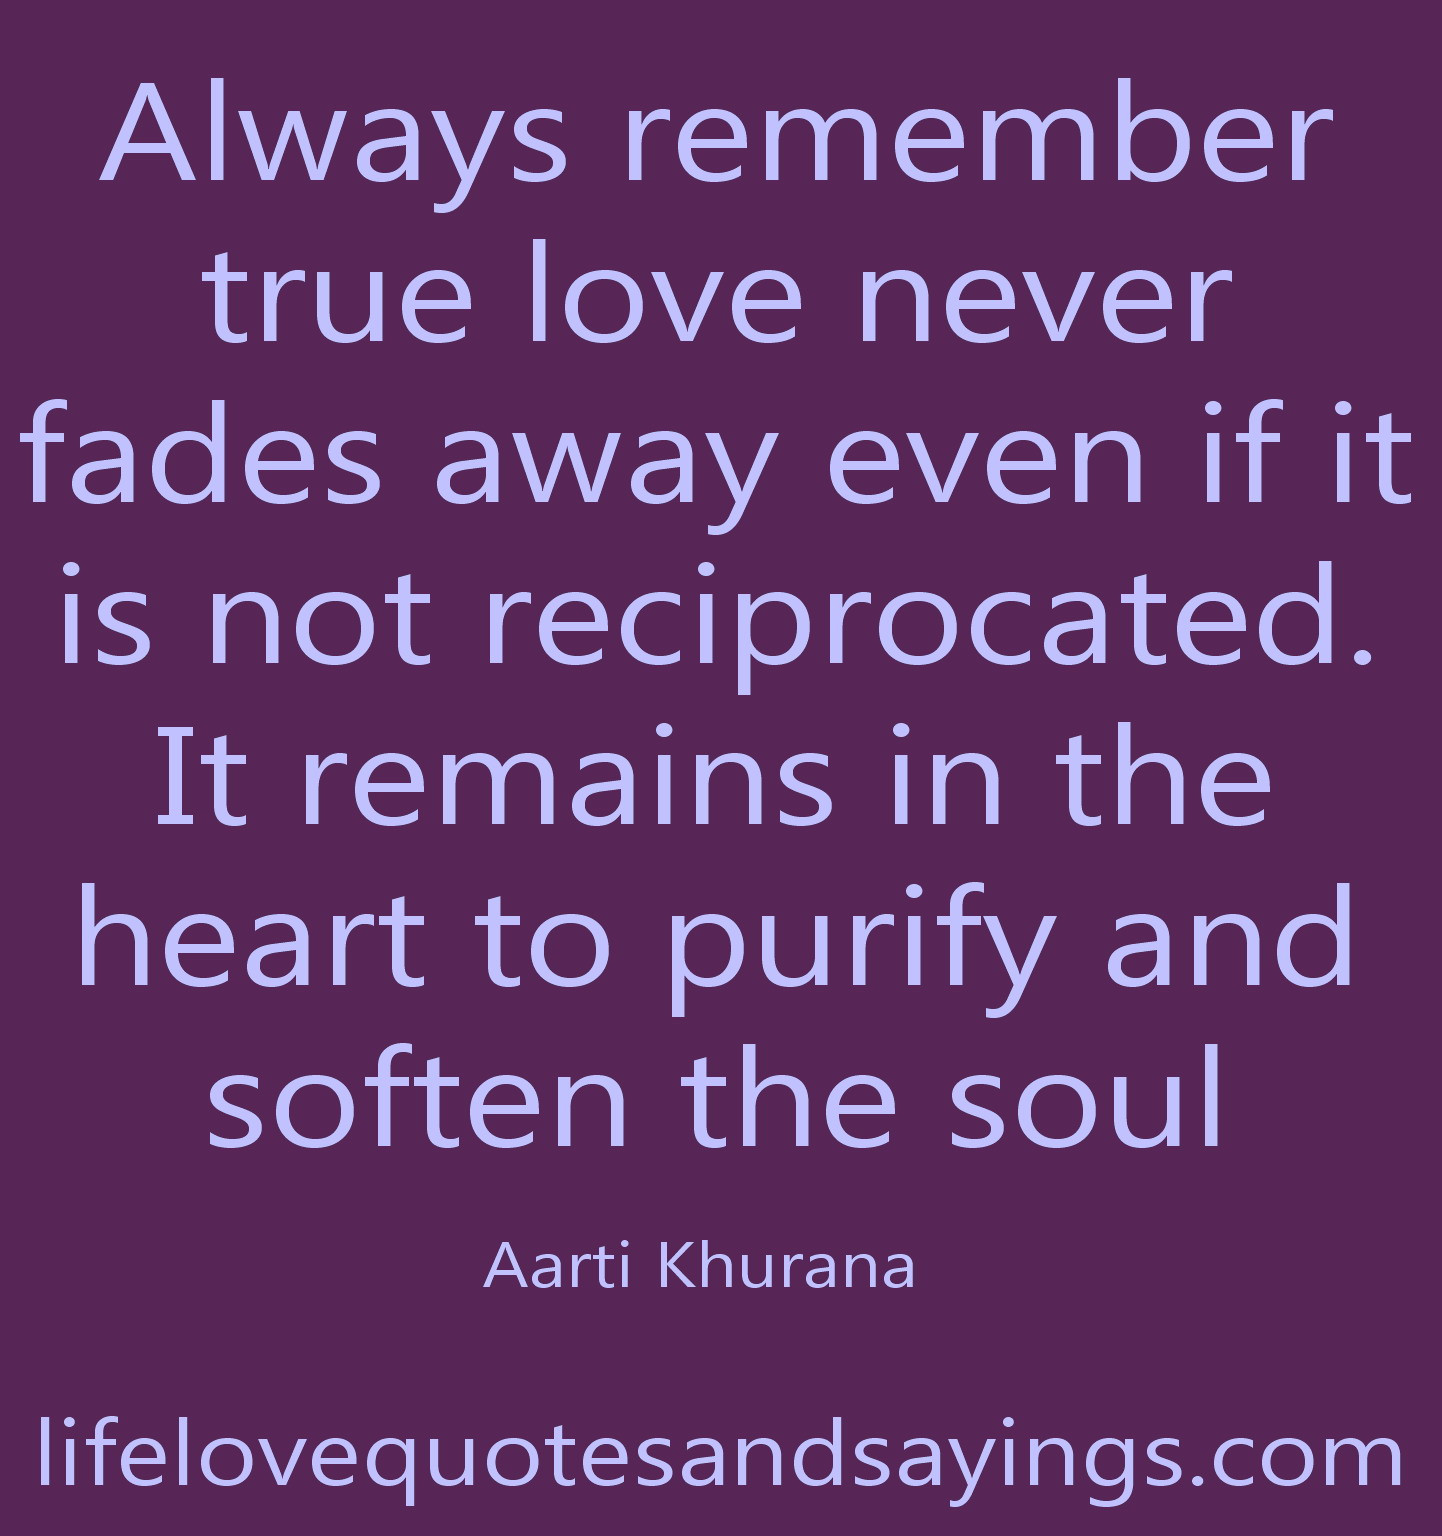 Romantic Quotes For Him From The Heart
 Funny Love Quotes For Him From The Heart QuotesGram